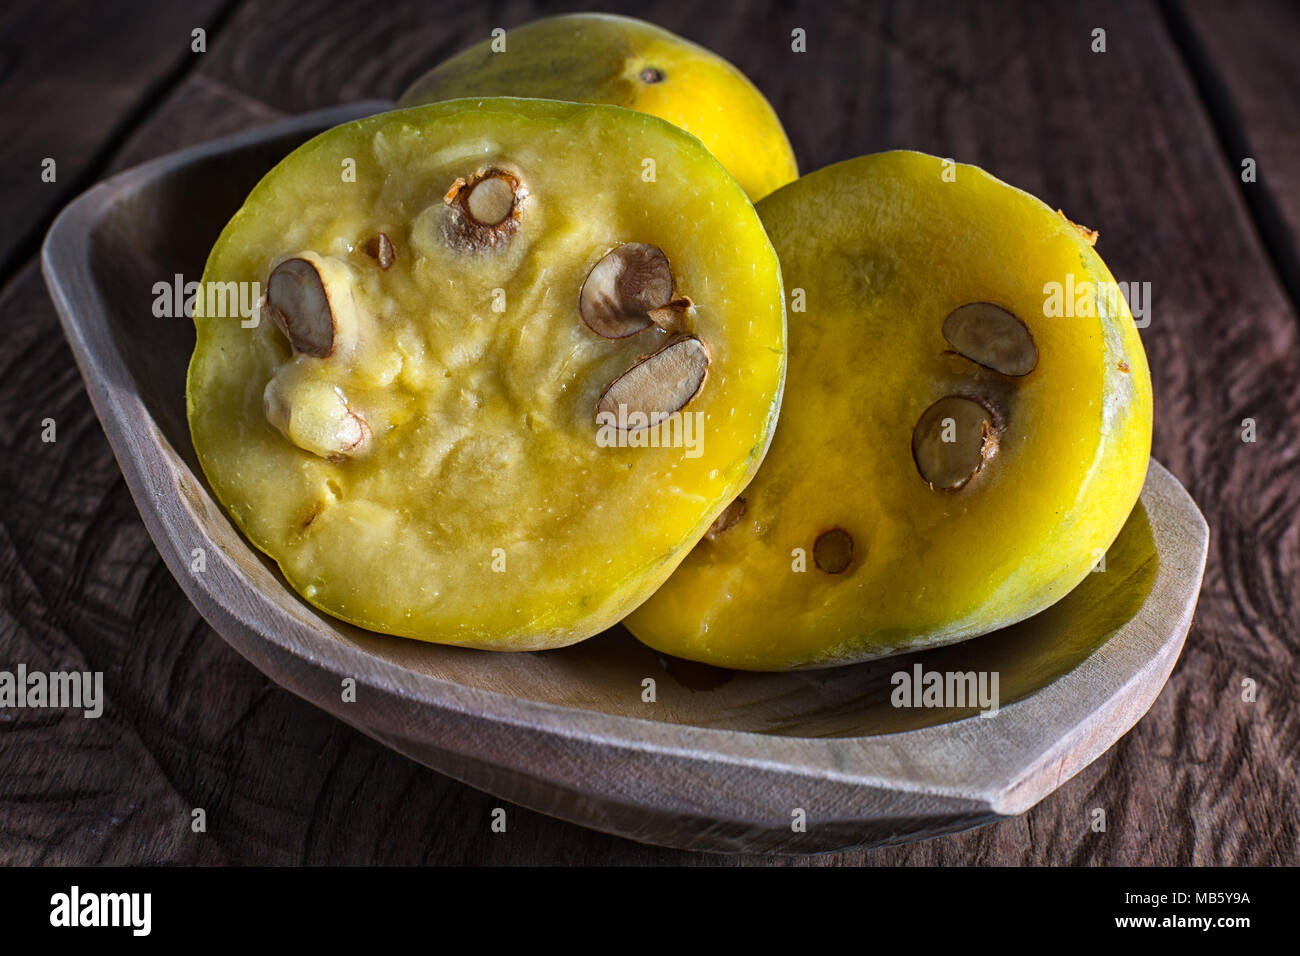 cut half rare araza fruits in a wooden bowl on rustic background Stock Photo